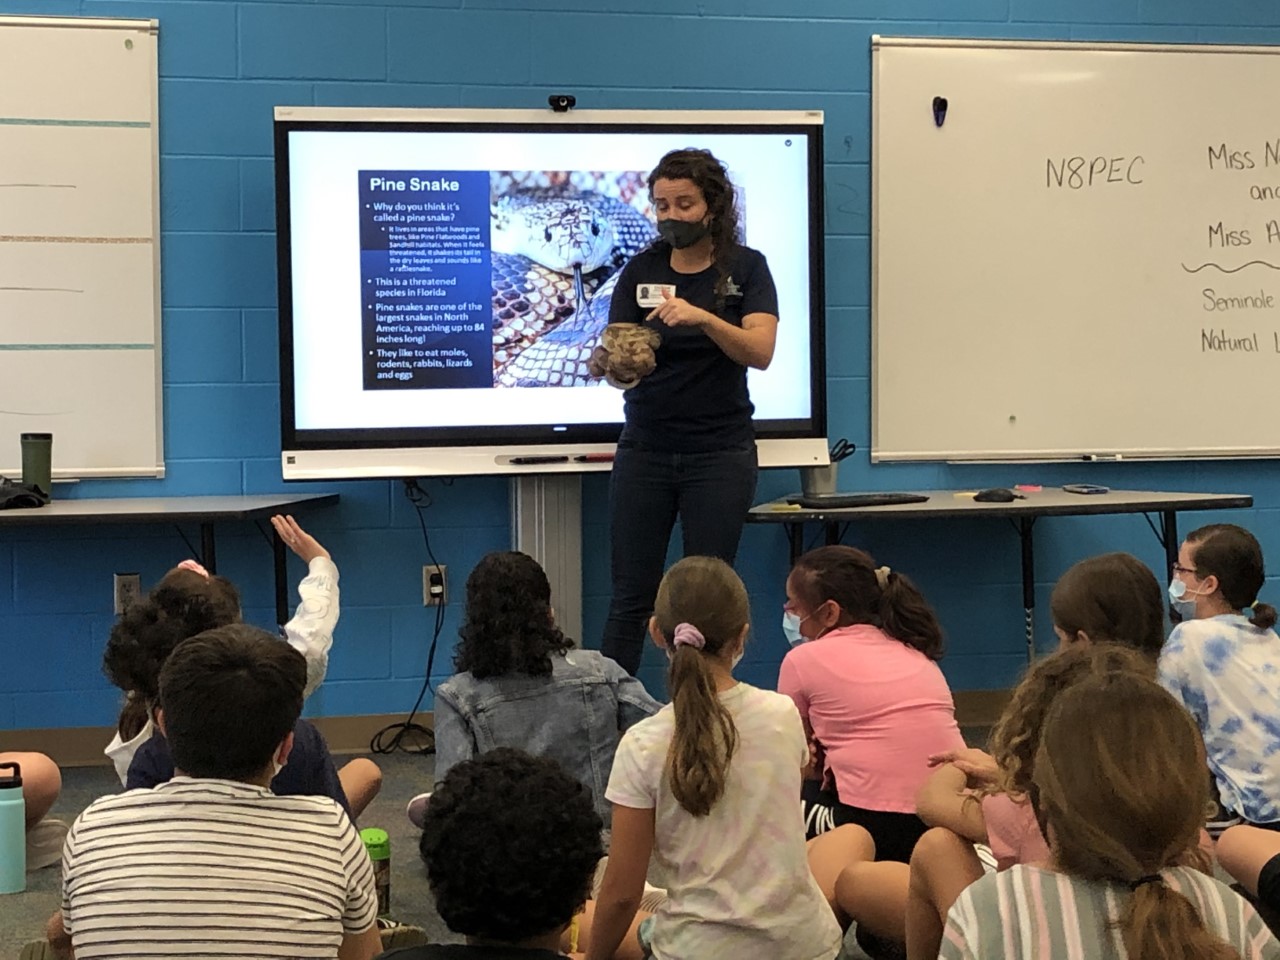 Natural Lands instructor holding a Florida pine snake, and pointing to it in front of a classroom of 5th grade students